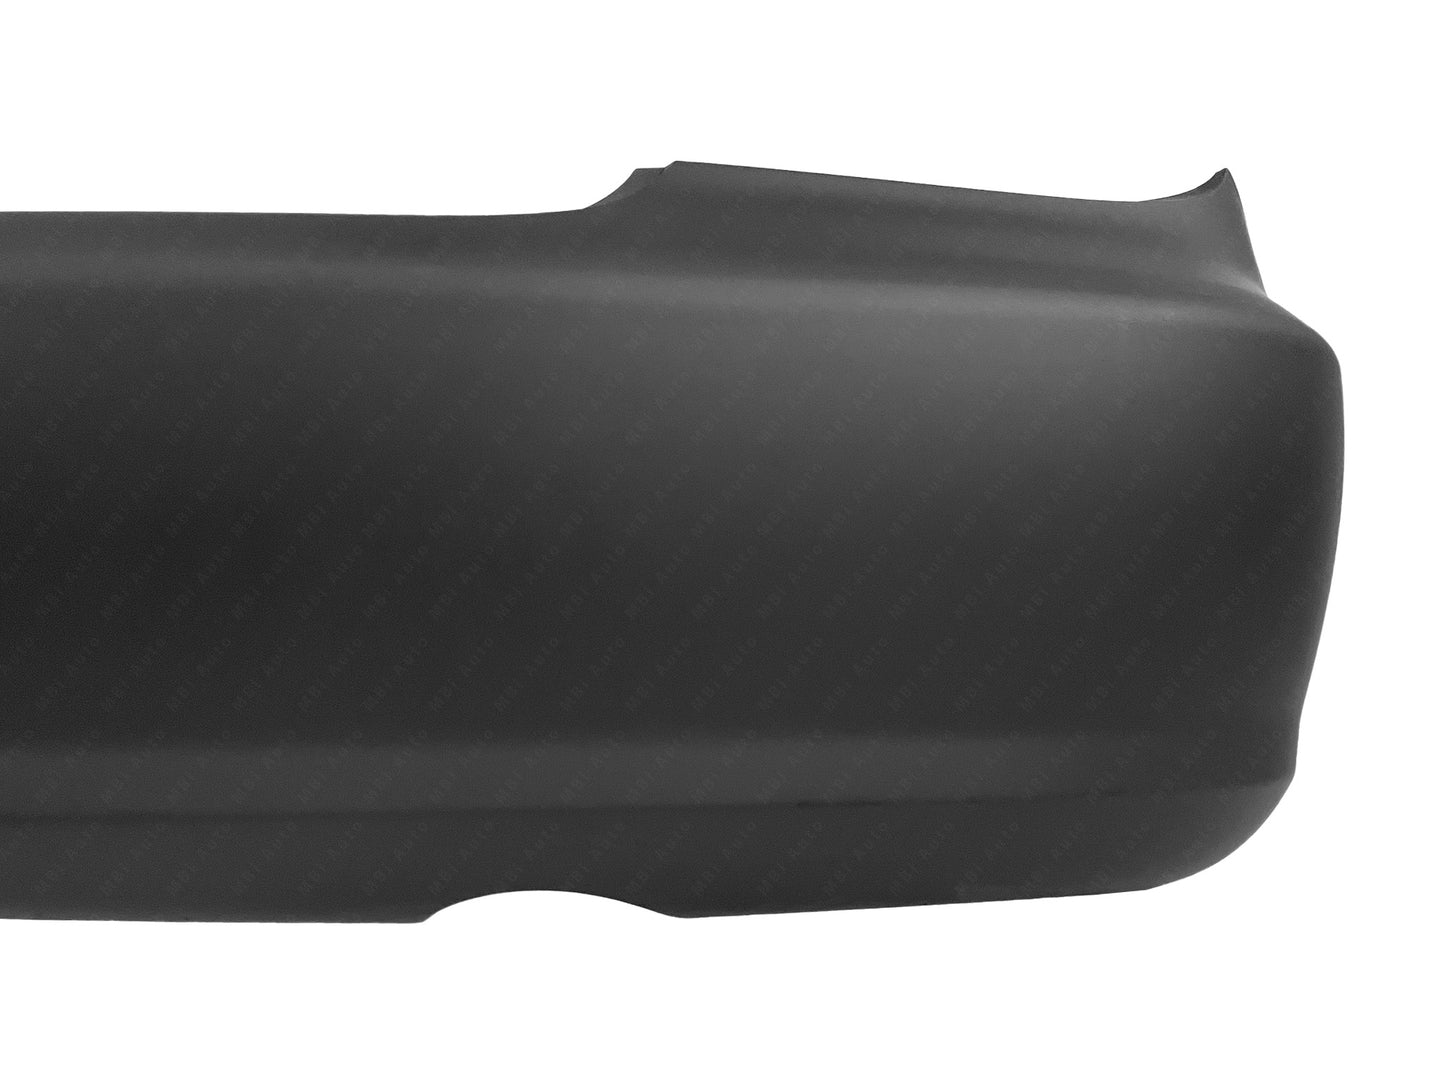 Toyota Camry 2002 - 2006 Rear Bumper Cover 02 - 06 TO1100203 Bumper King